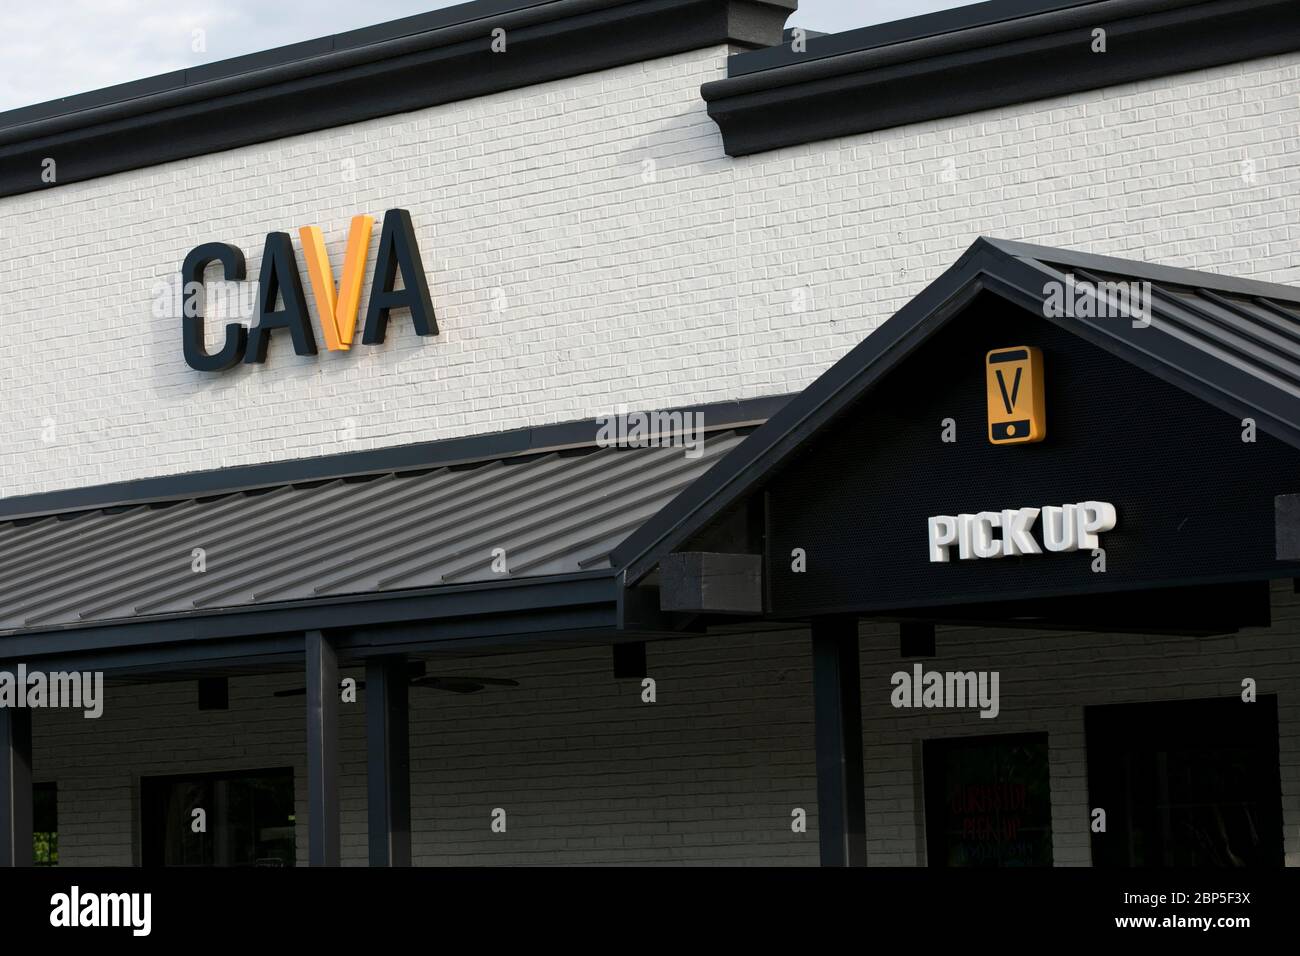 A logo sign outside of a Cava restaurant location in Richmond, Virginia on May 13, 2020. Stock Photo